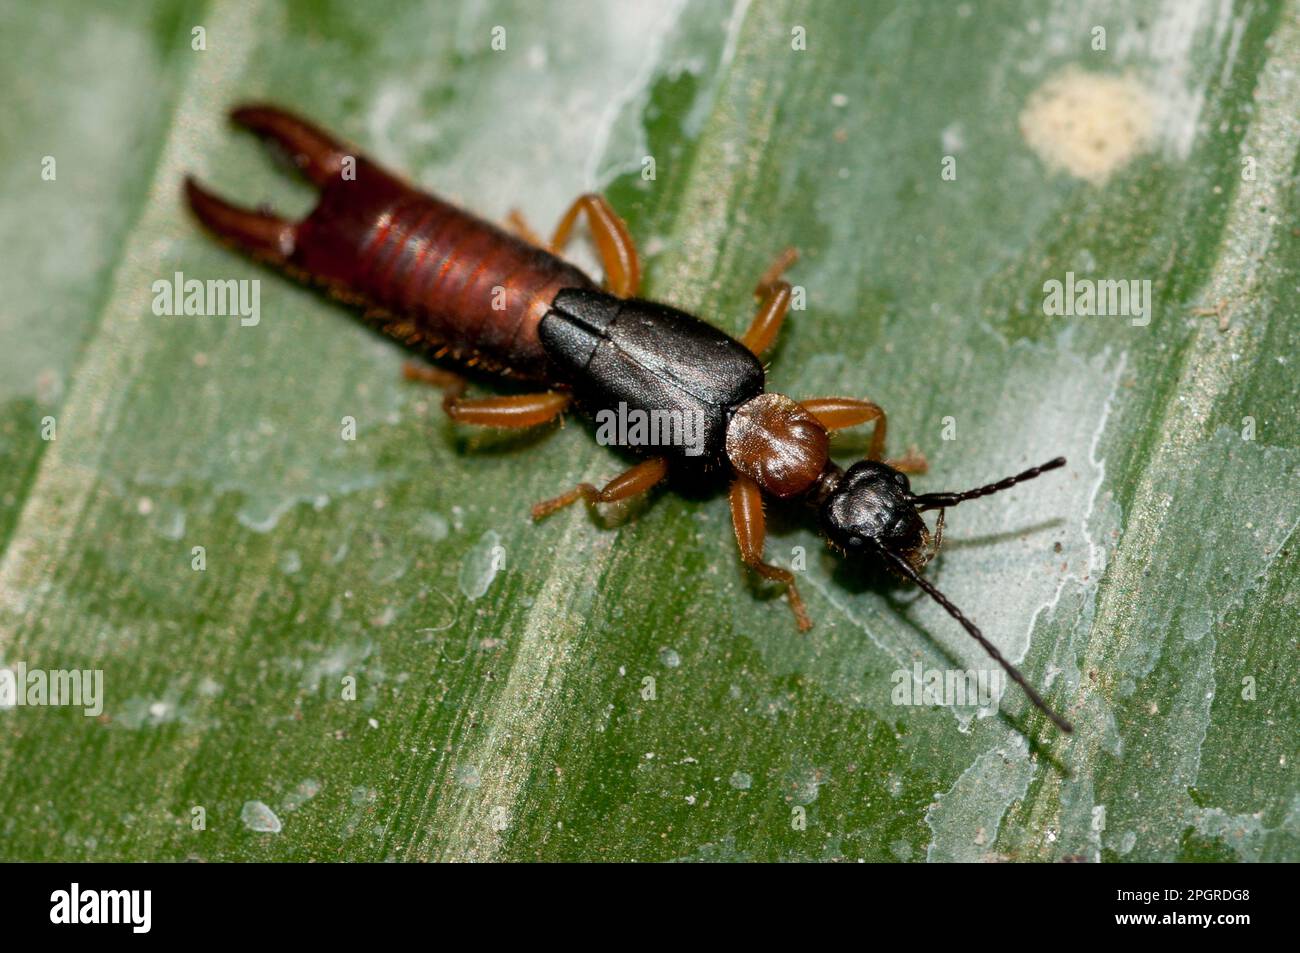 Earwig, Dermaptera Family, on leaf, Klungkung, Bali, Indonesia Stock Photo